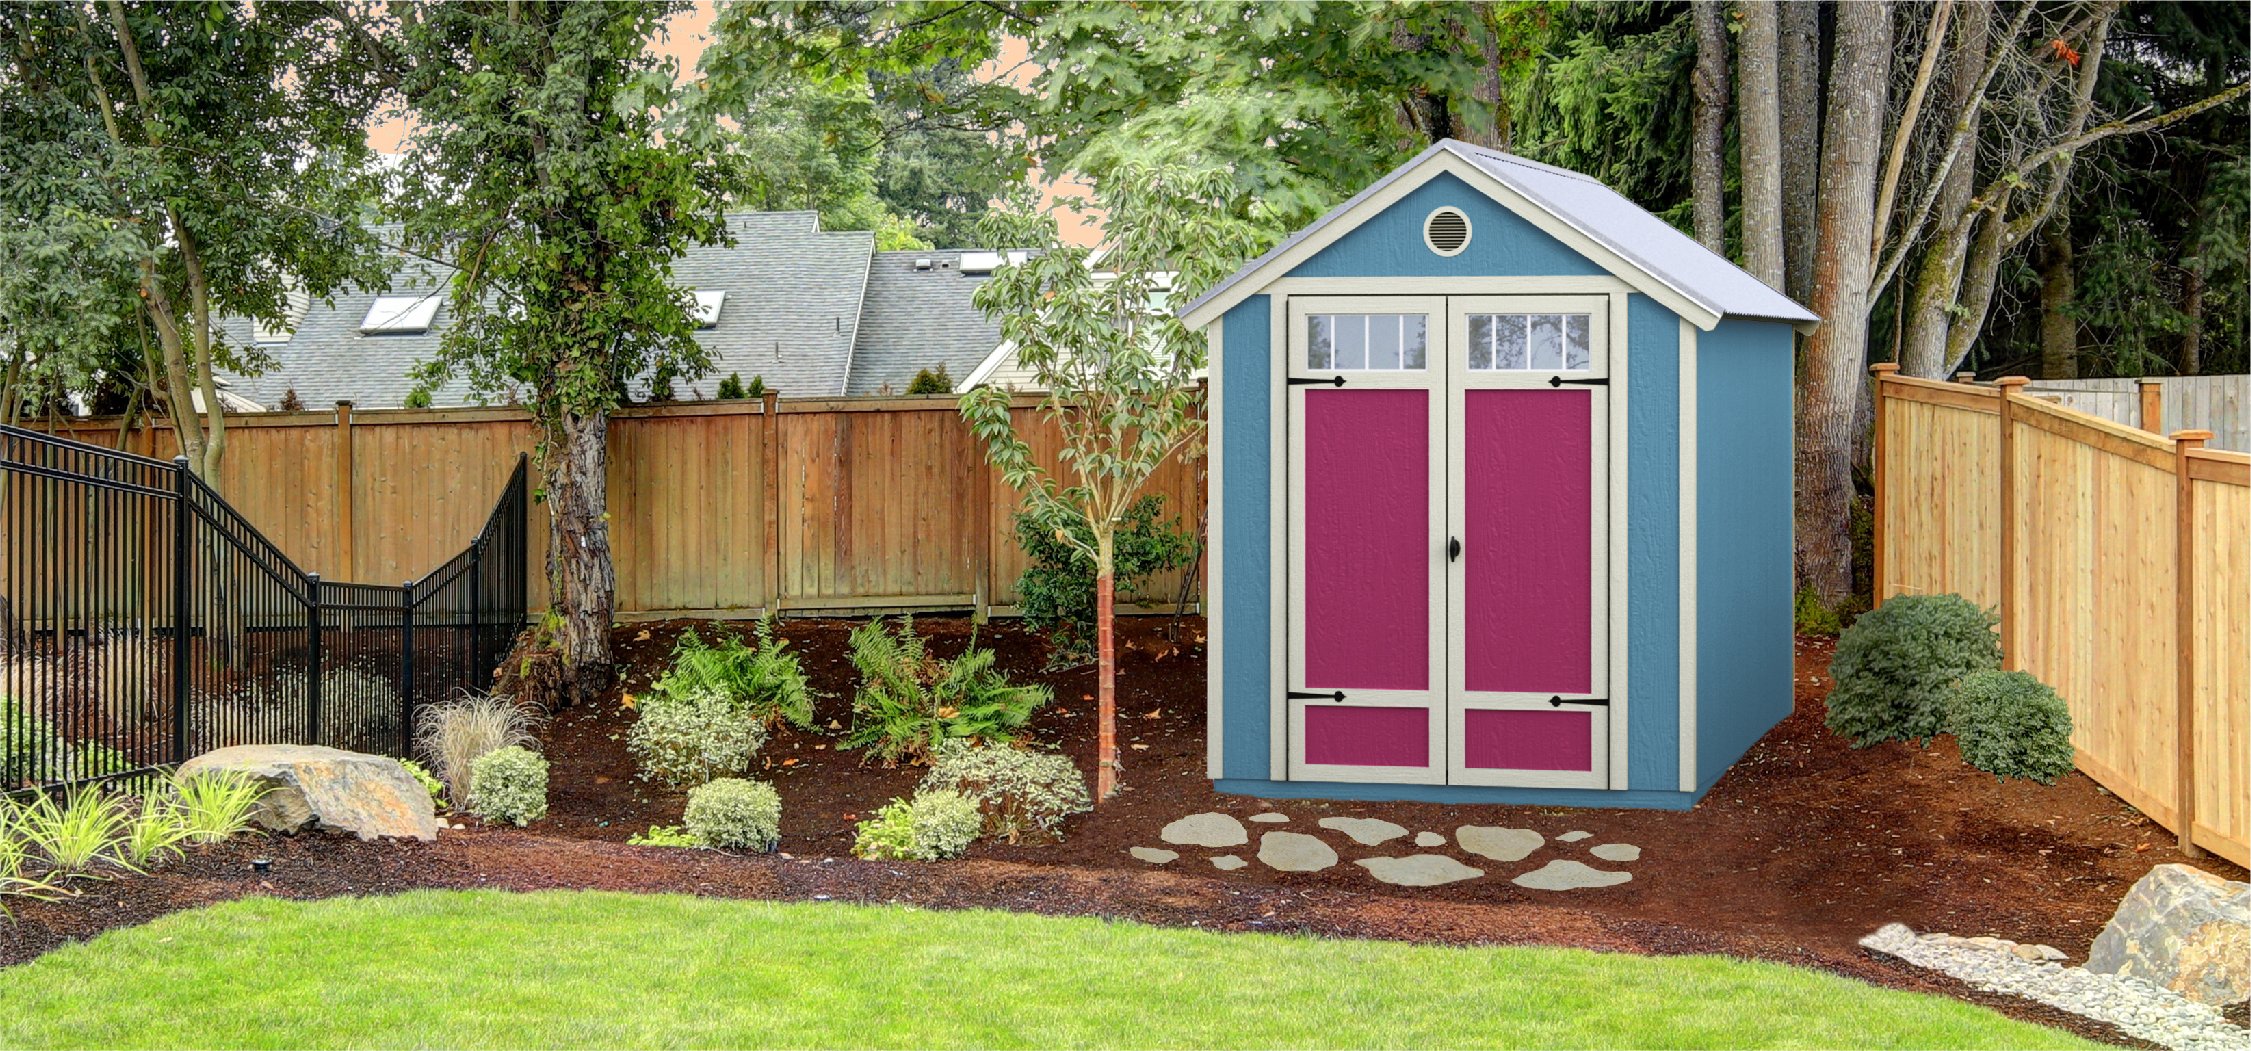 Garden shed against a wooden fence painted blue with magenta doors.